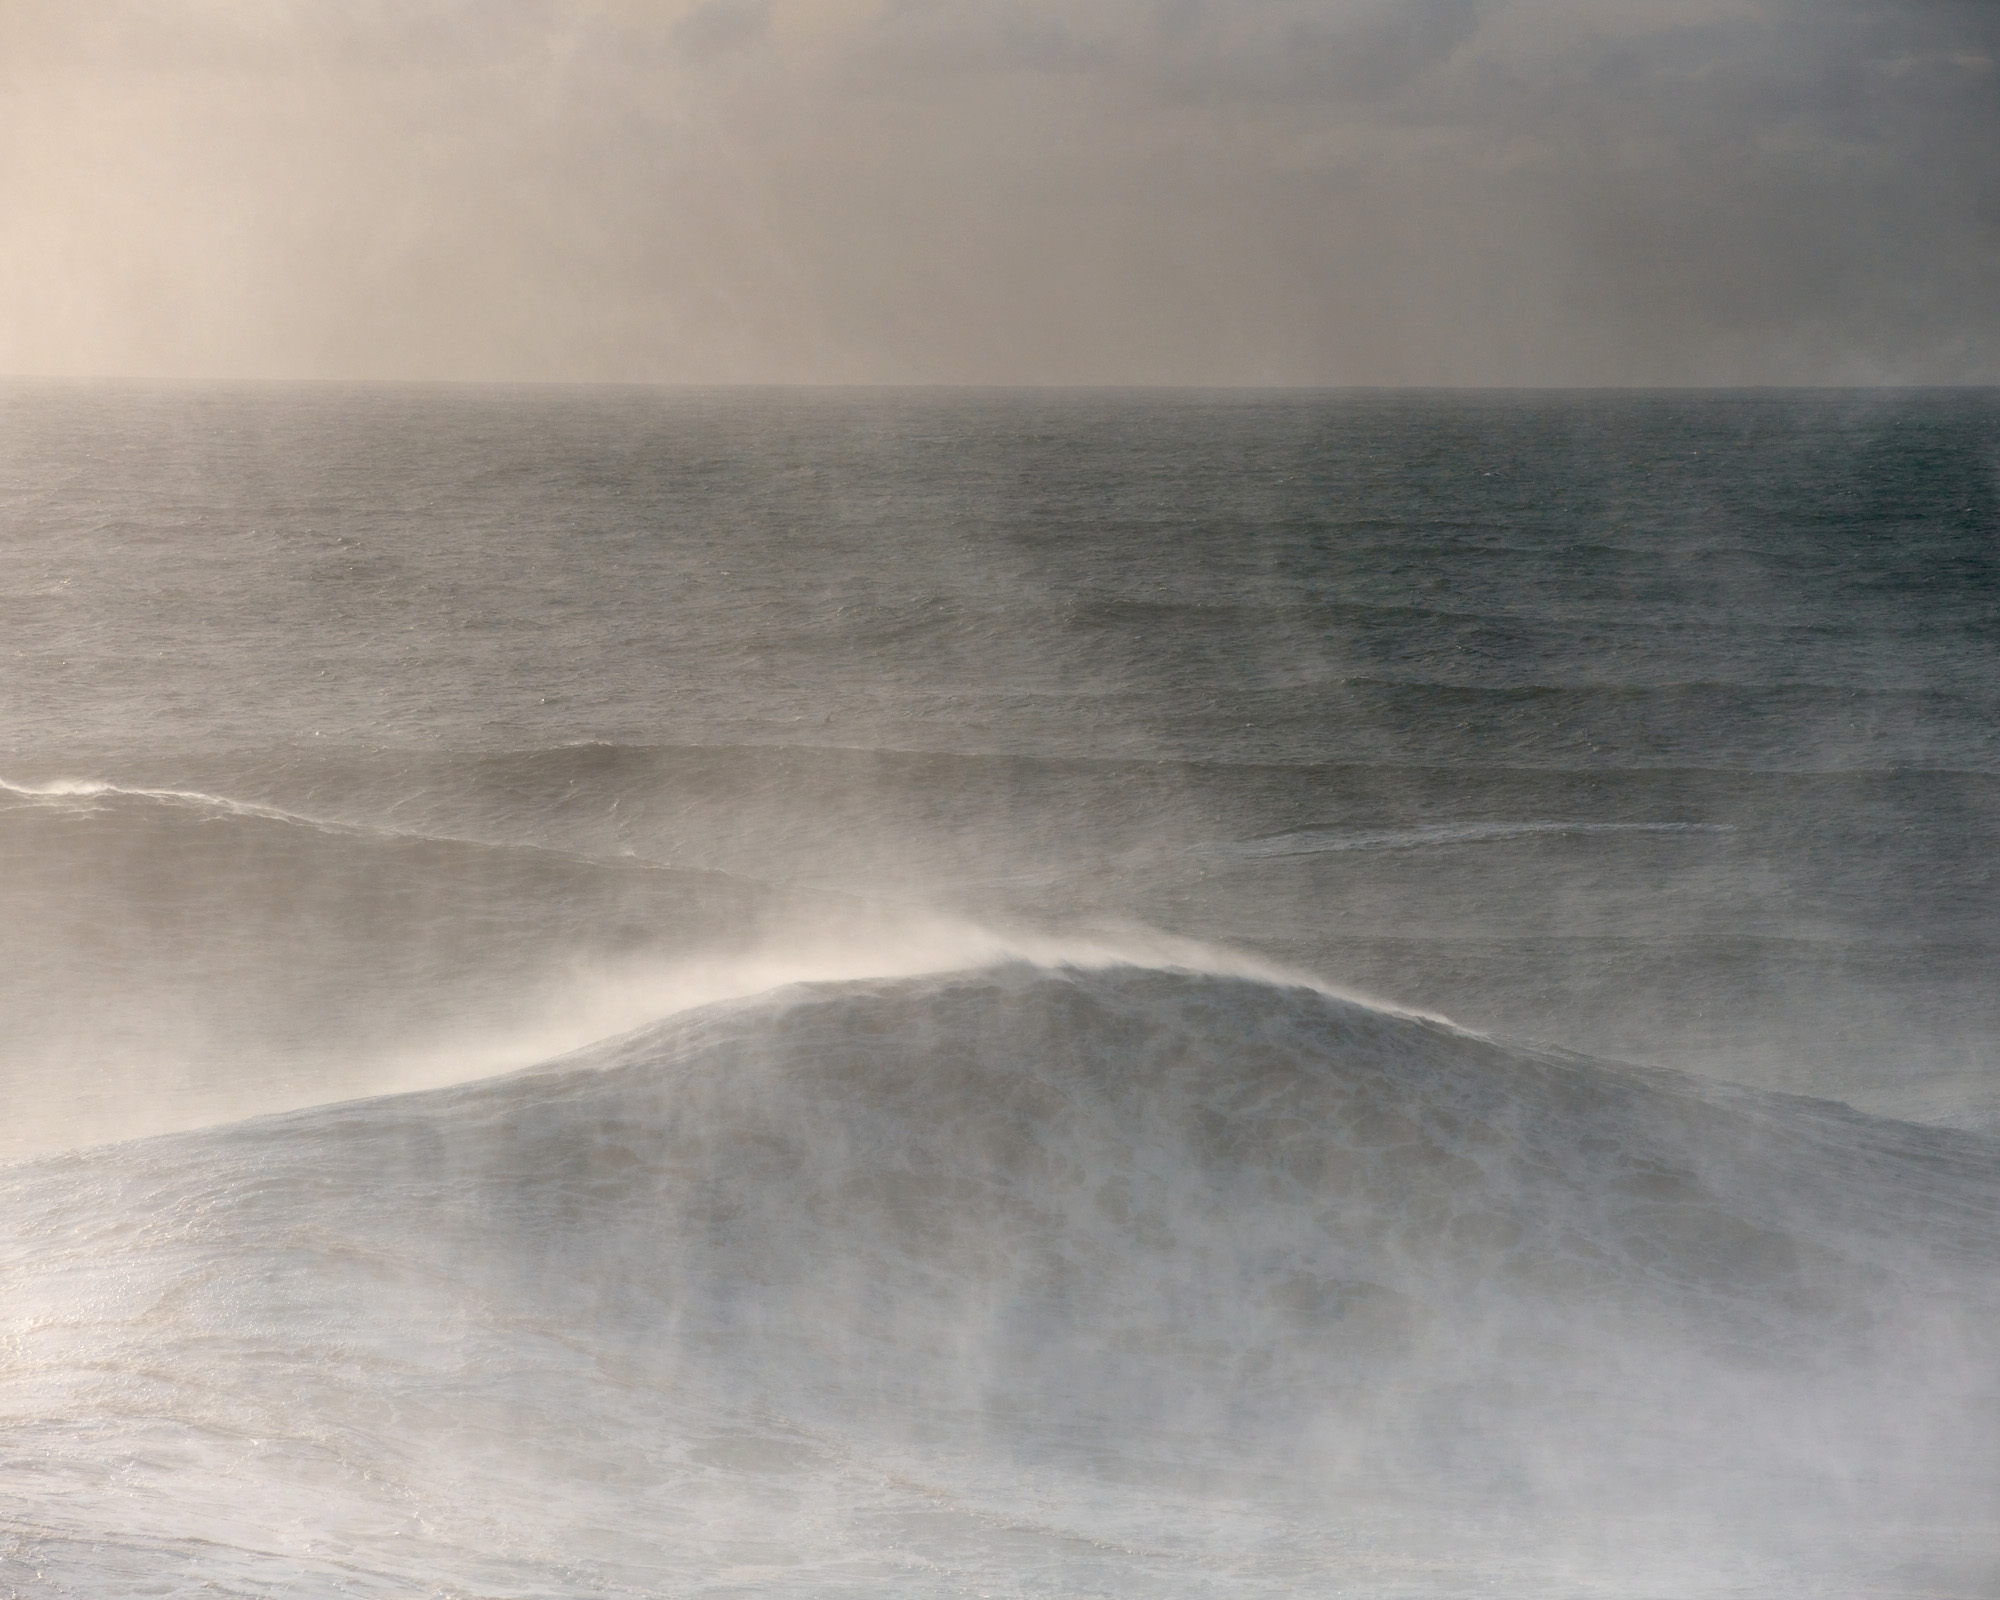 Sunset in the Atlantic sea in Nazaré during a big winter swell